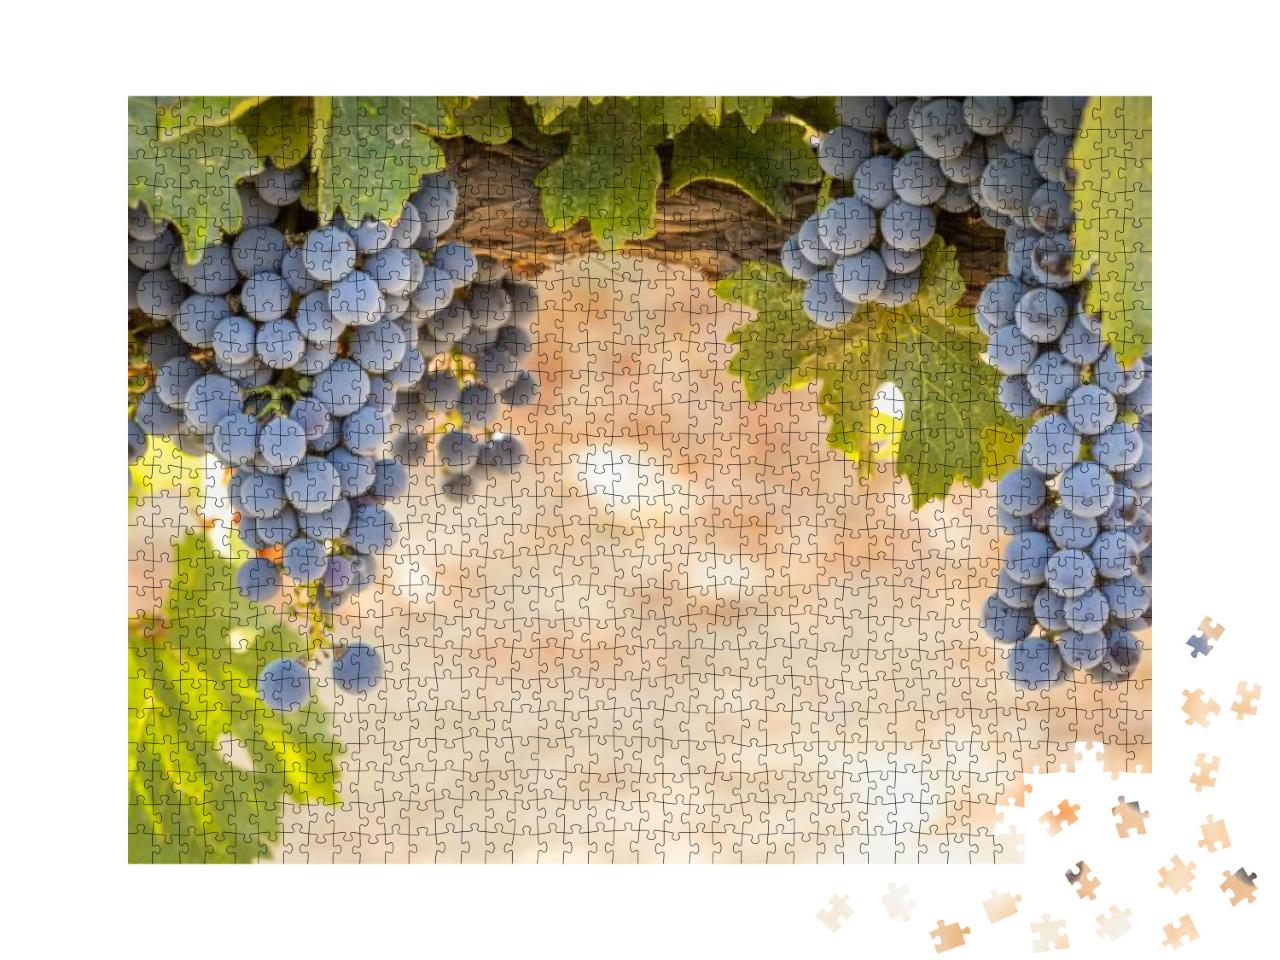 Beautiful Lush Wine Grape Bushels in the Vineyard... Jigsaw Puzzle with 1000 pieces